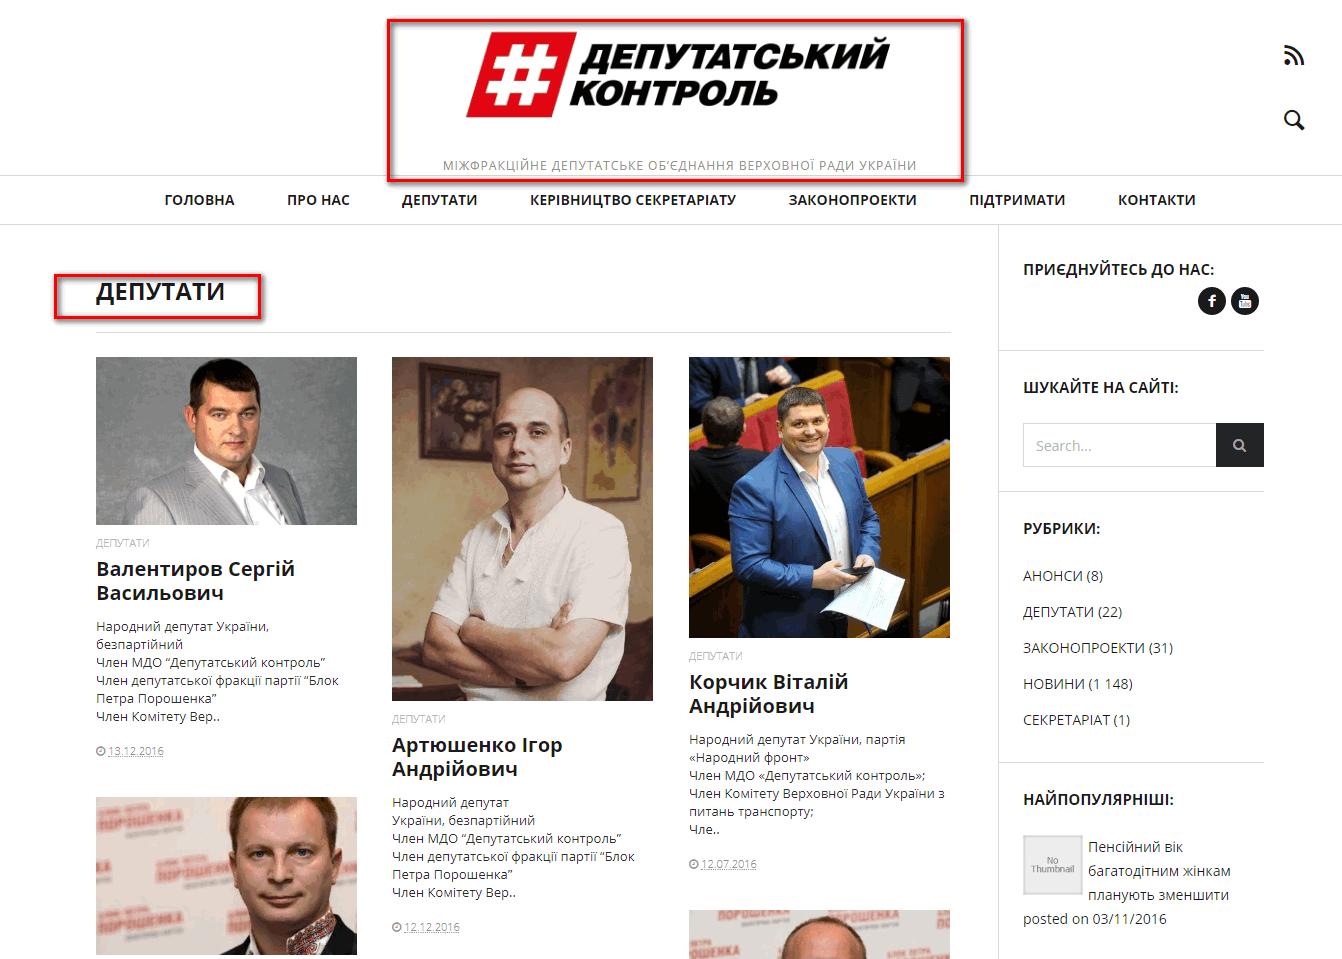 http://depcontrol.org/category/members-of-parliament/